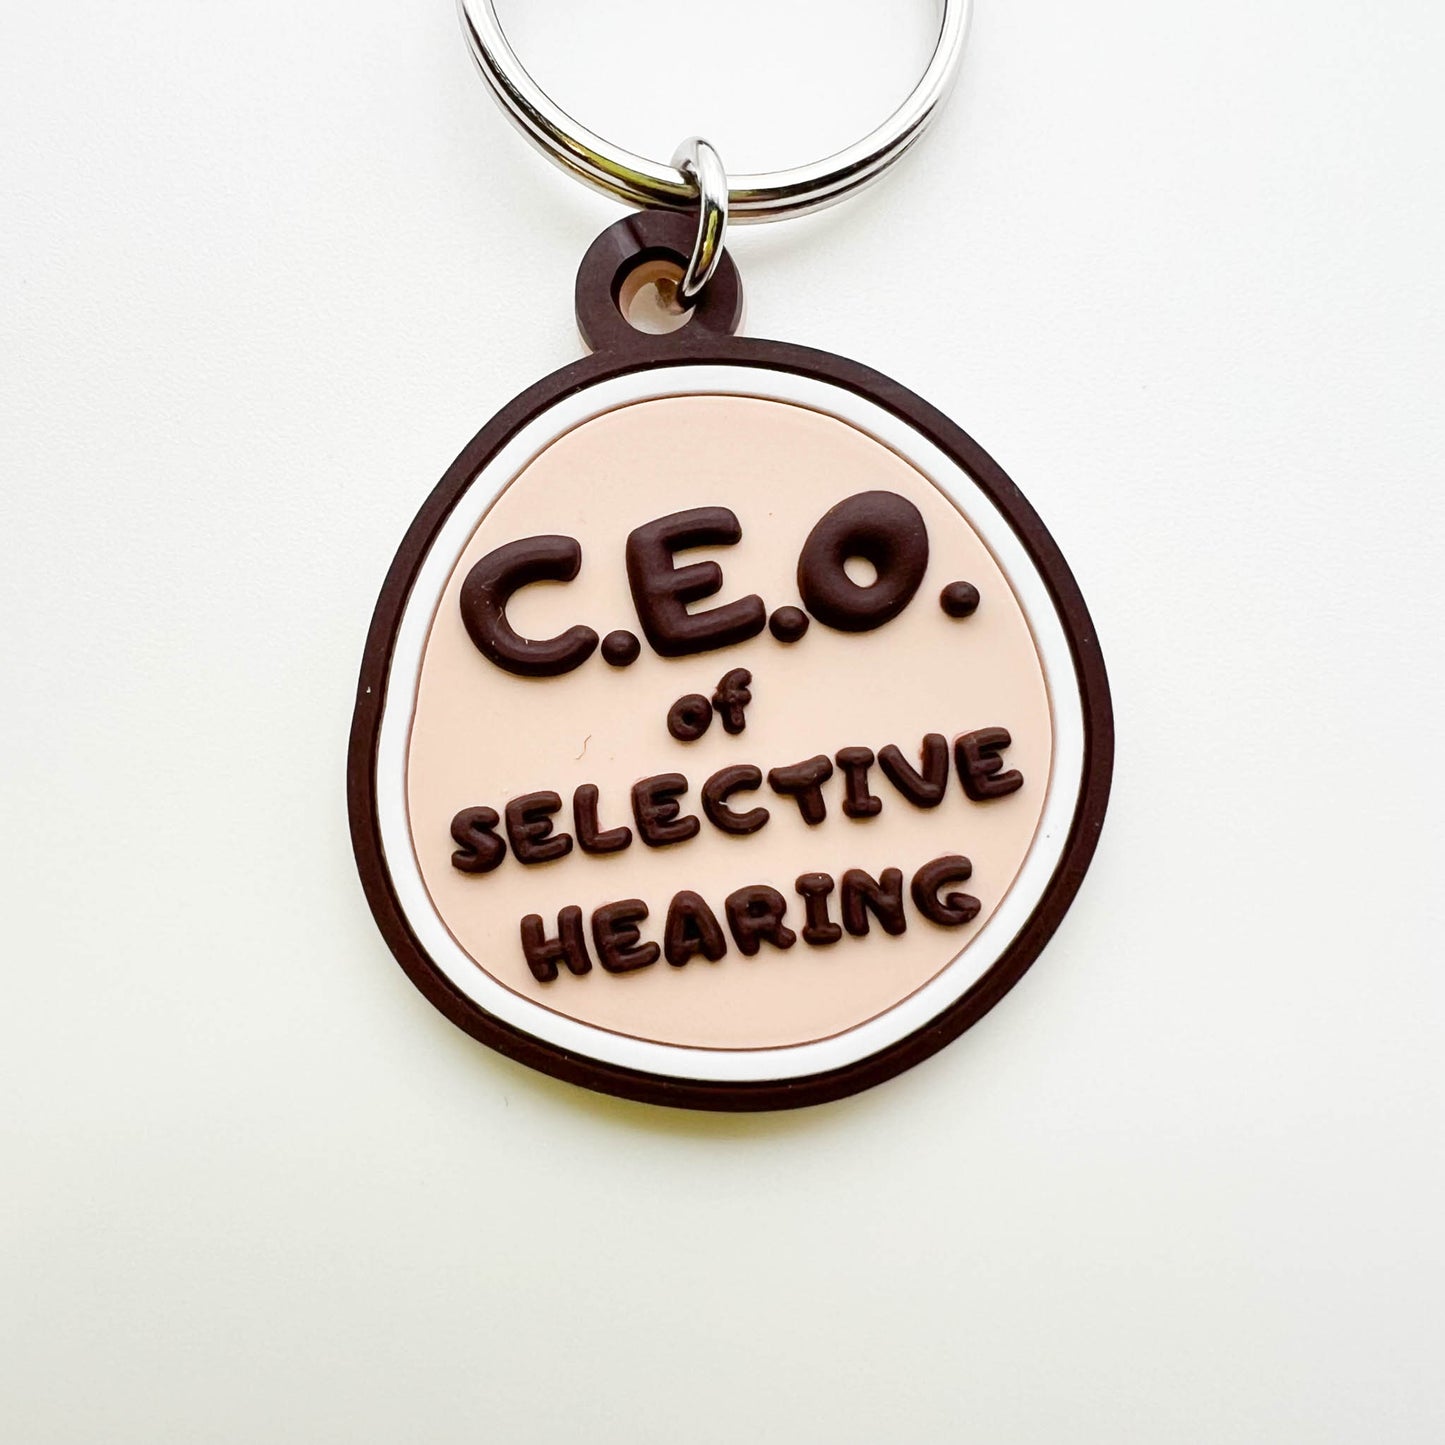 Hilarious Pet Collar Charm - CEO of Selective Listening